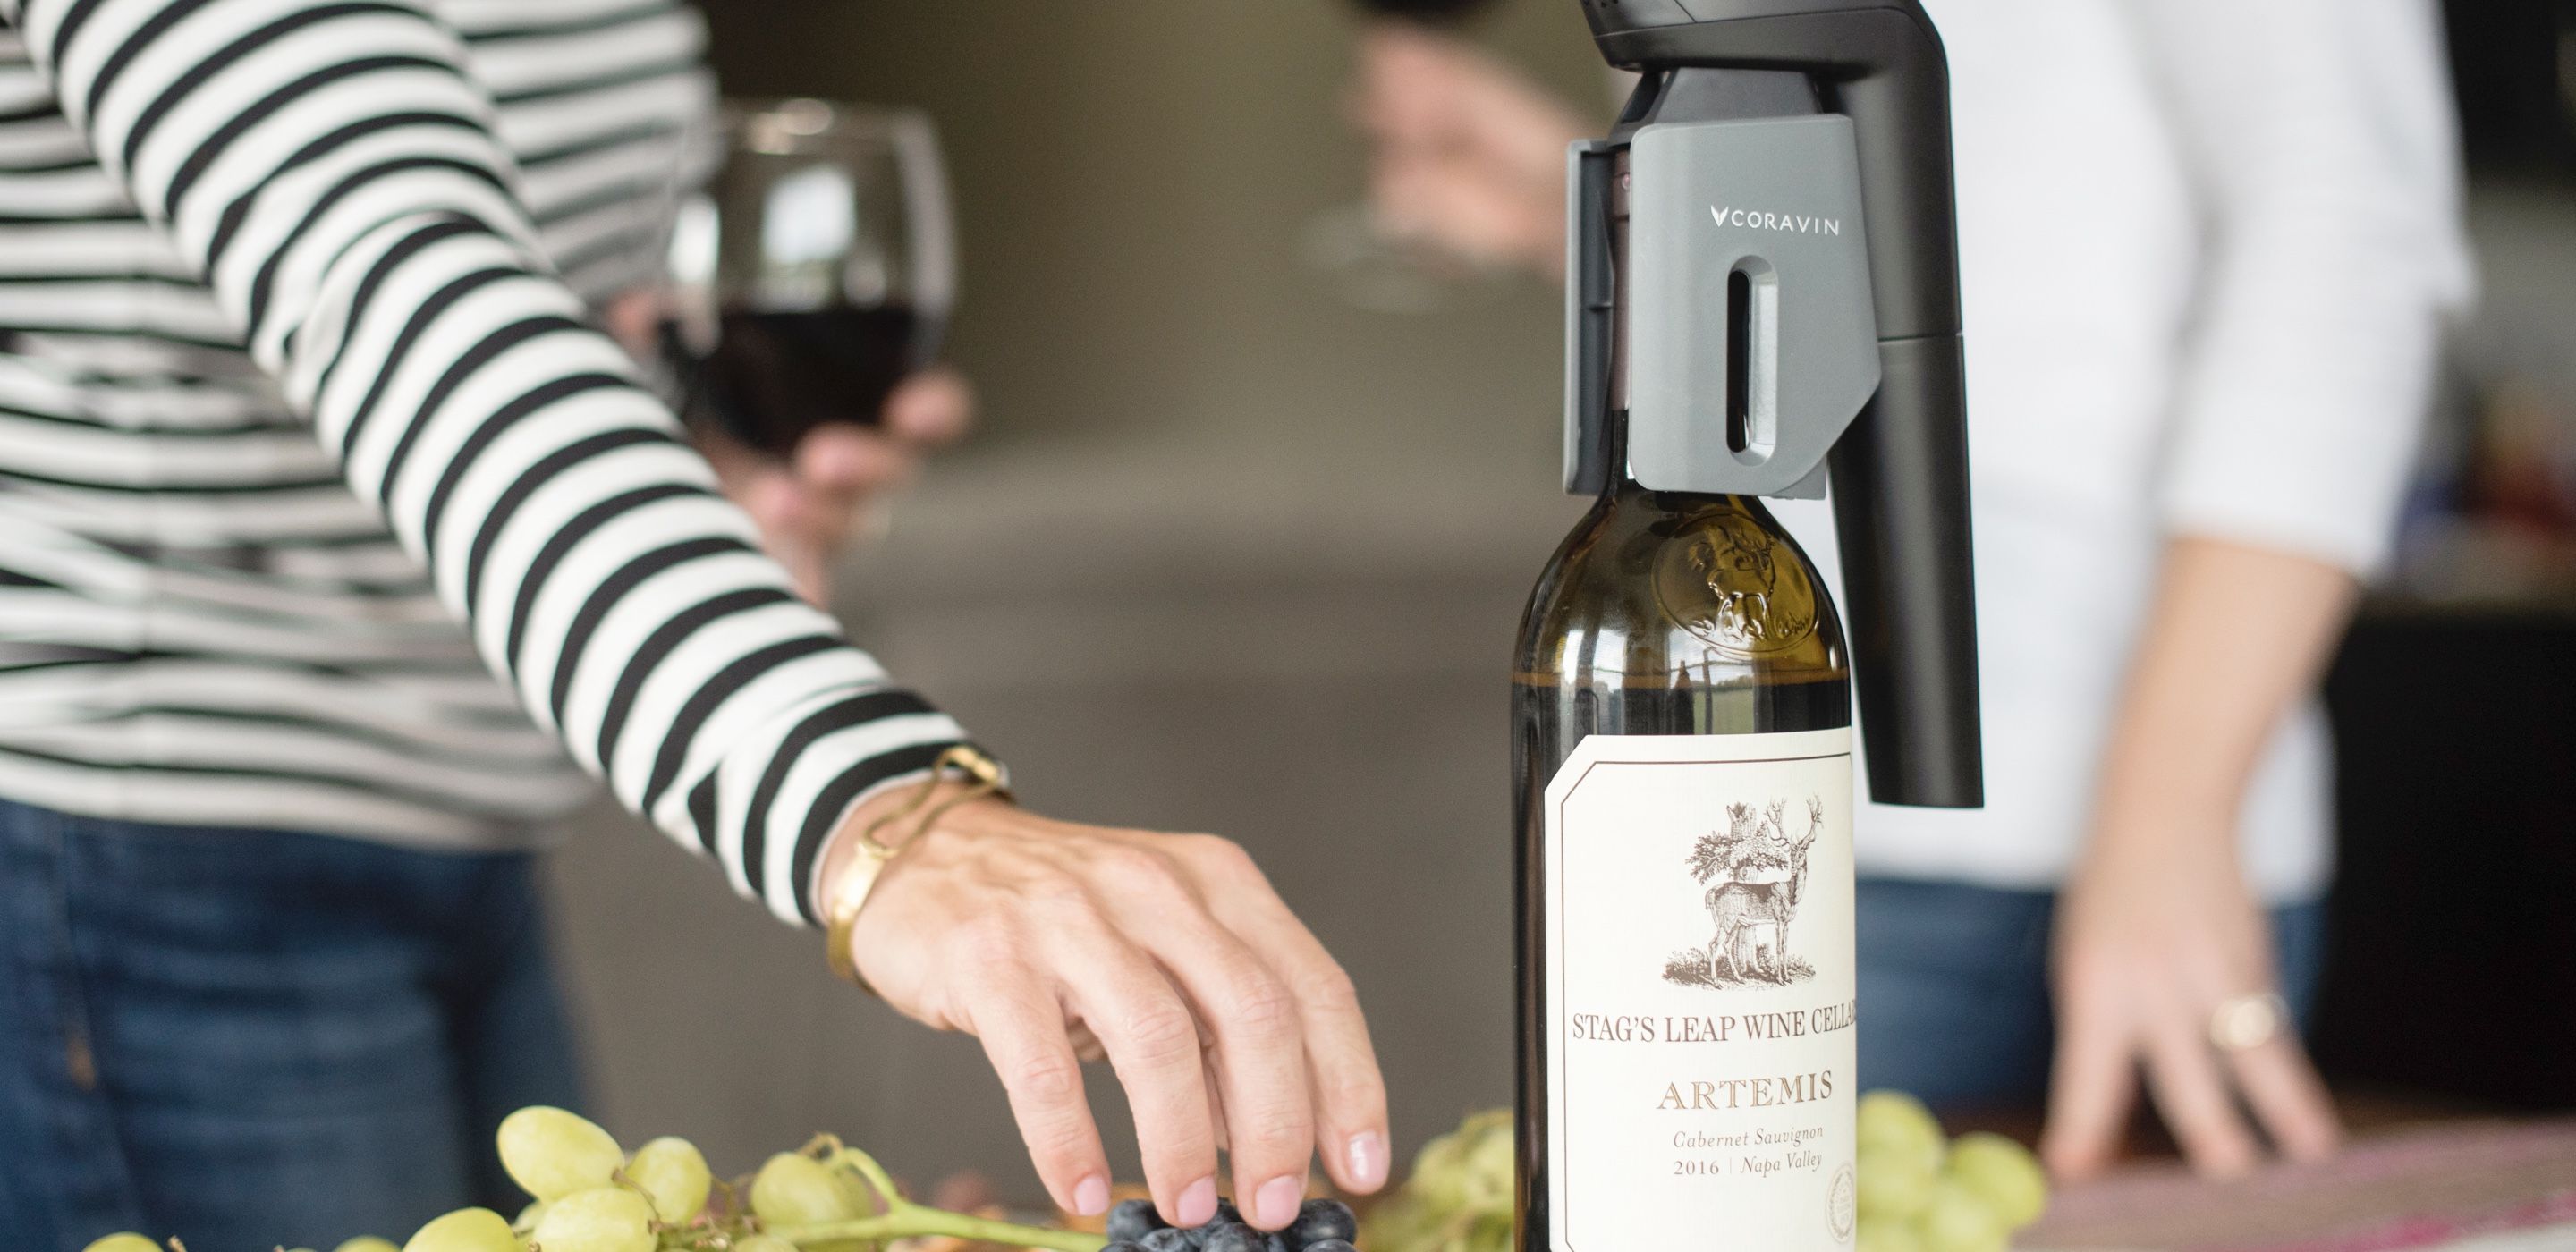 Coravin wine preservation system on top of a wine bottle. A person is grabbing grapes from beside the bottle.